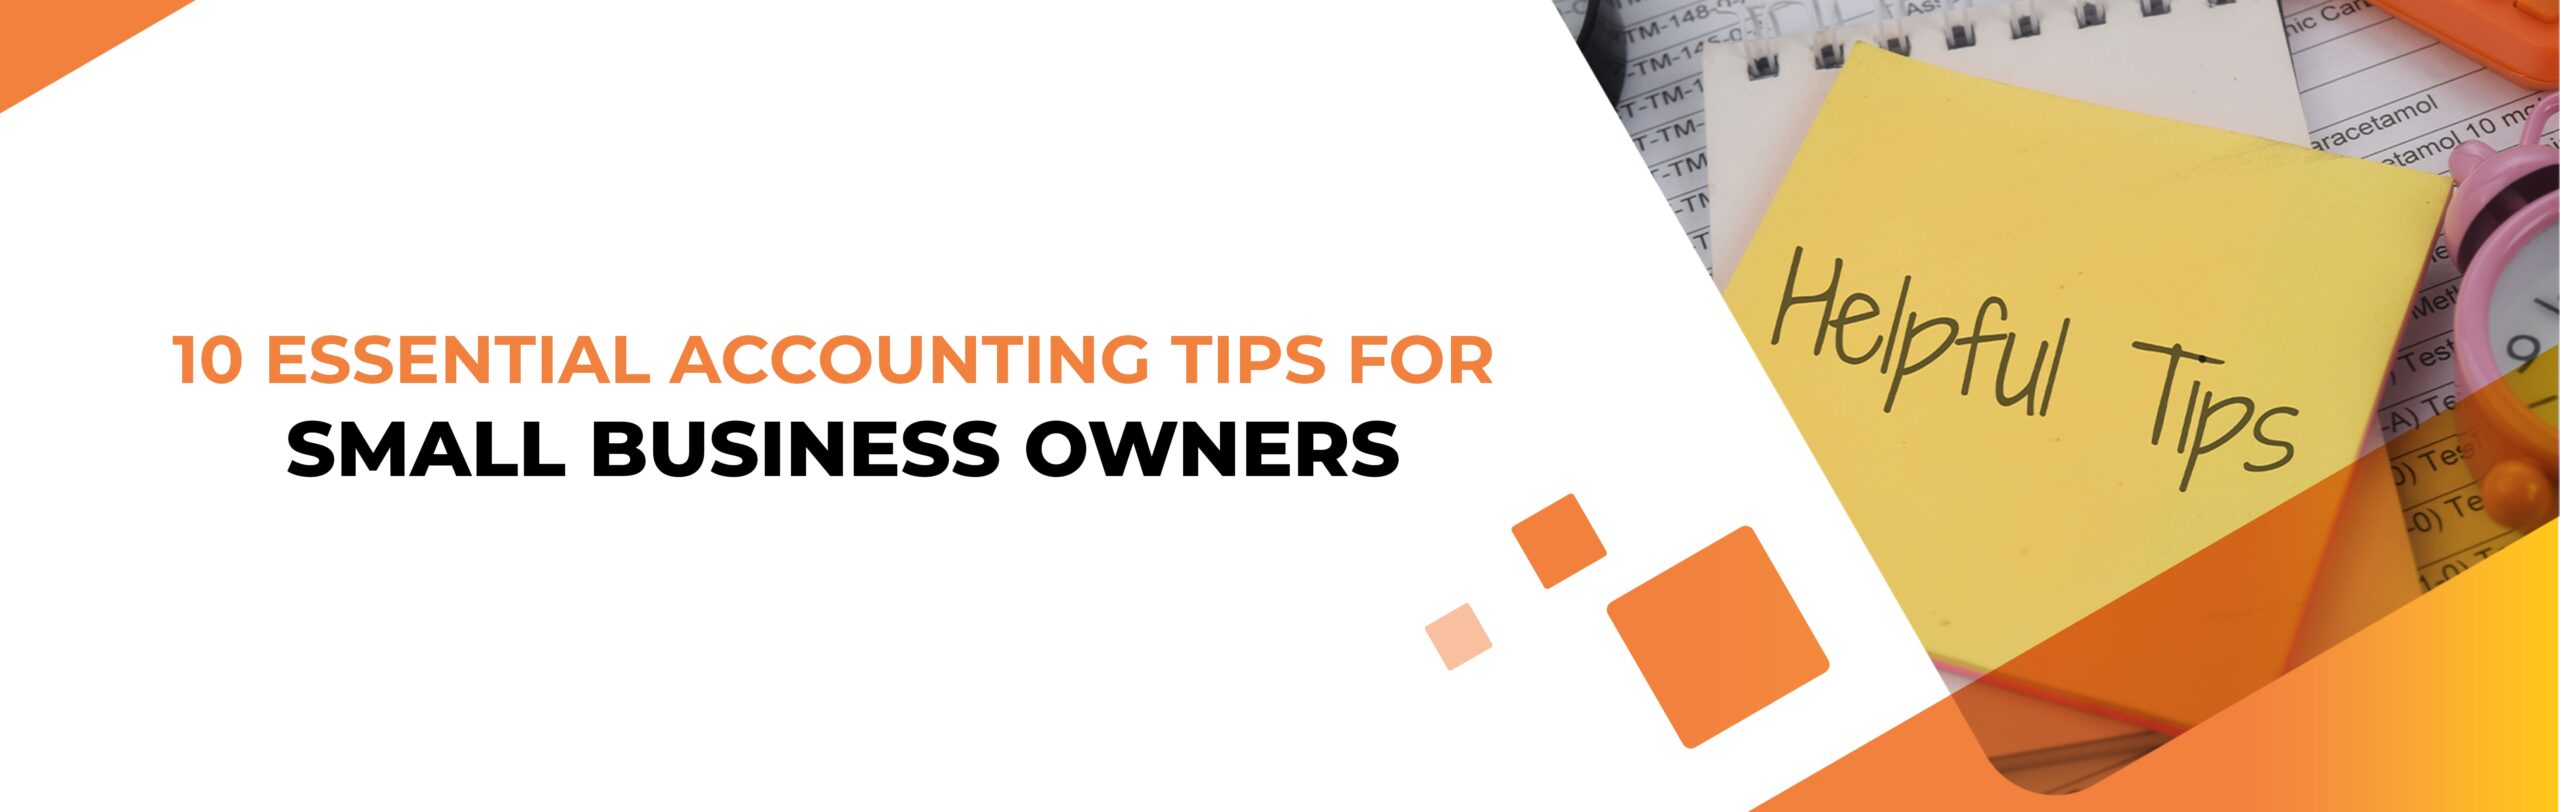 10 Essential Accounting Tips for Small Business Owners